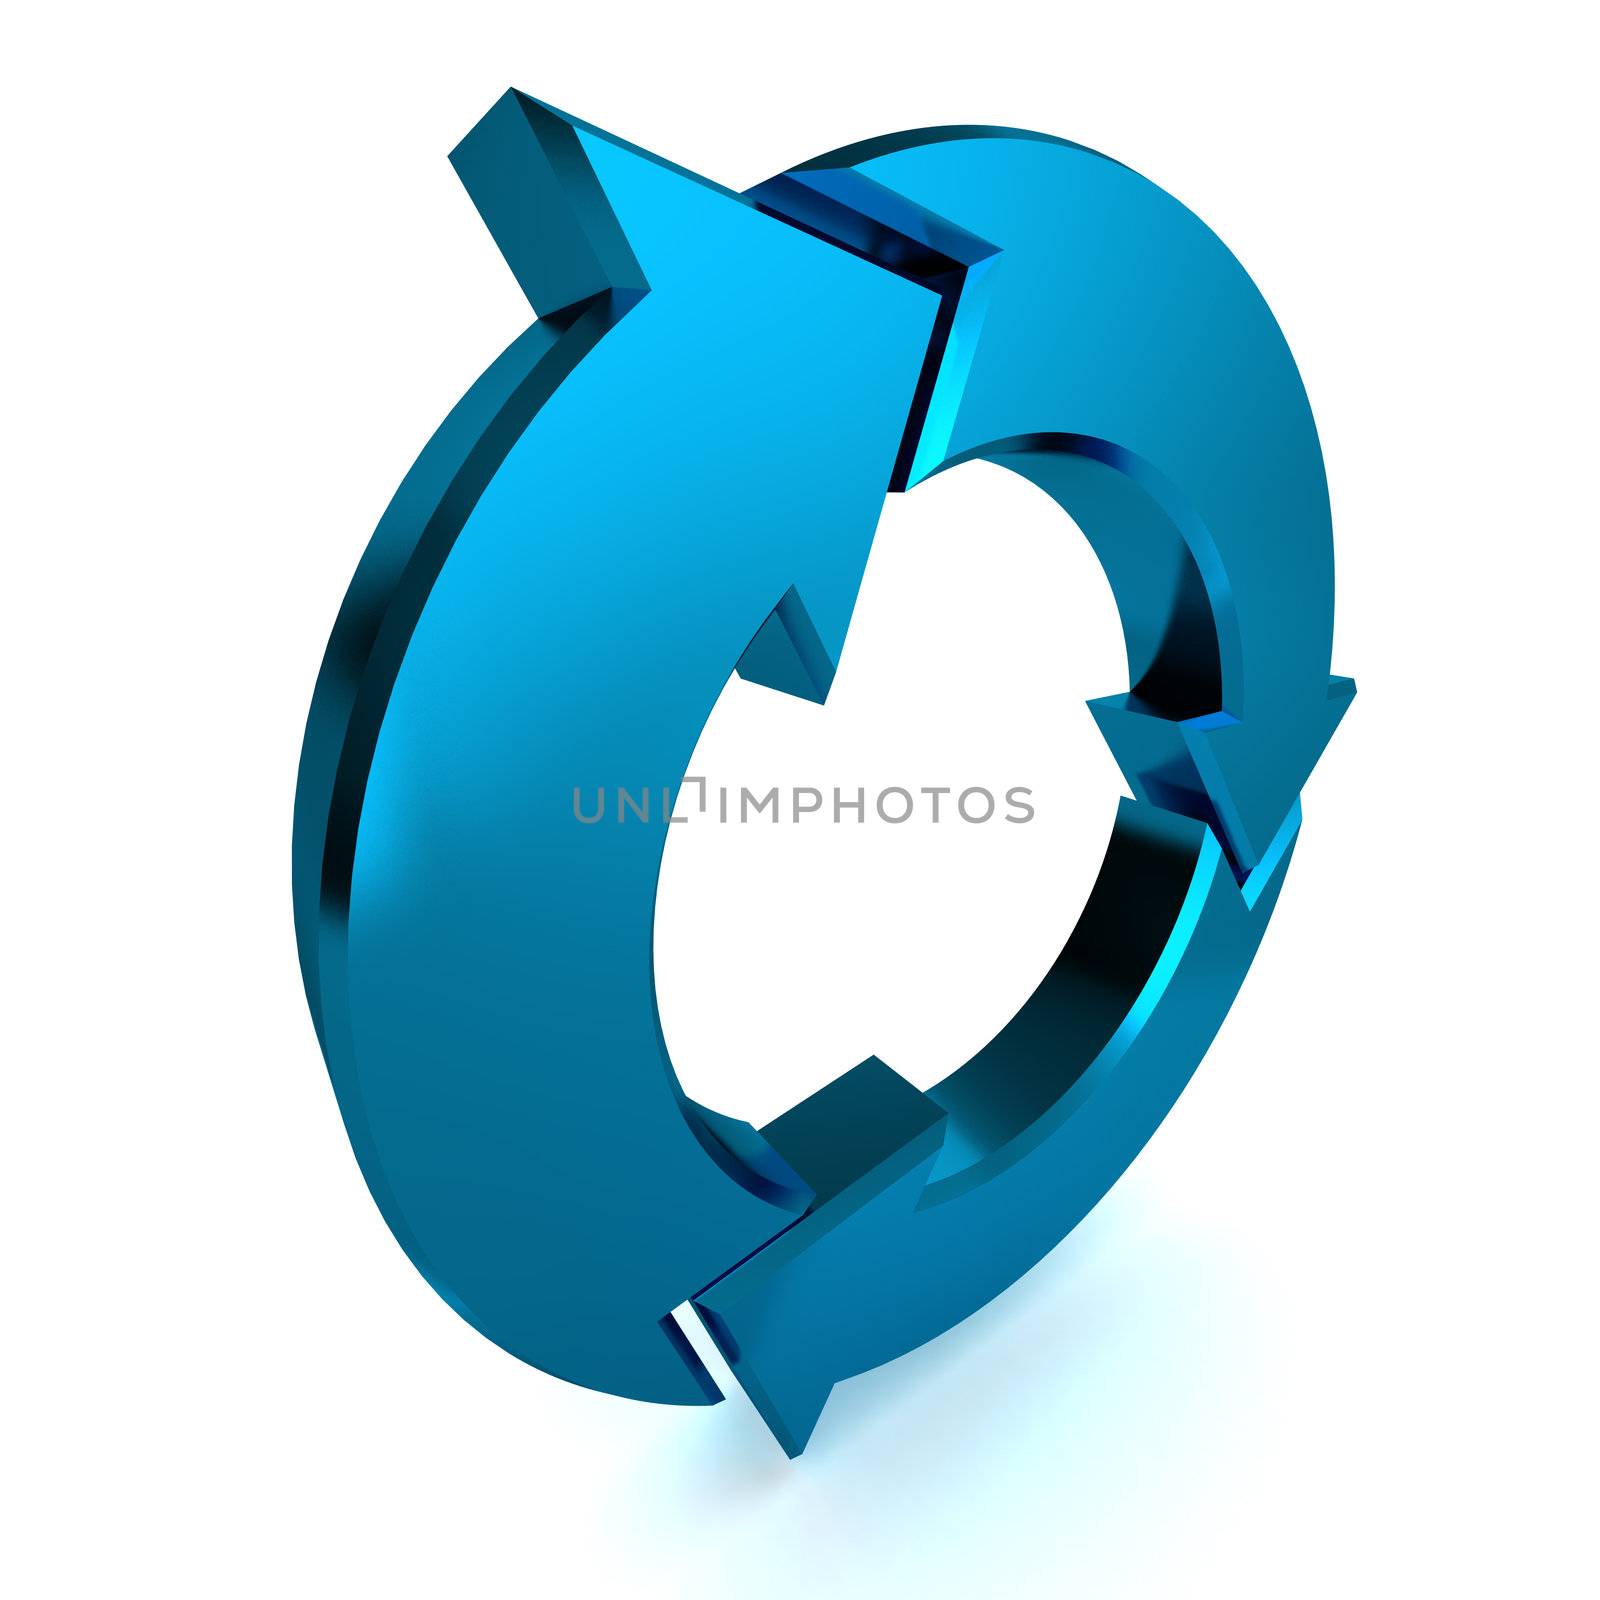 A Colourful 3d Rendered Blue Process Arrow Illustration